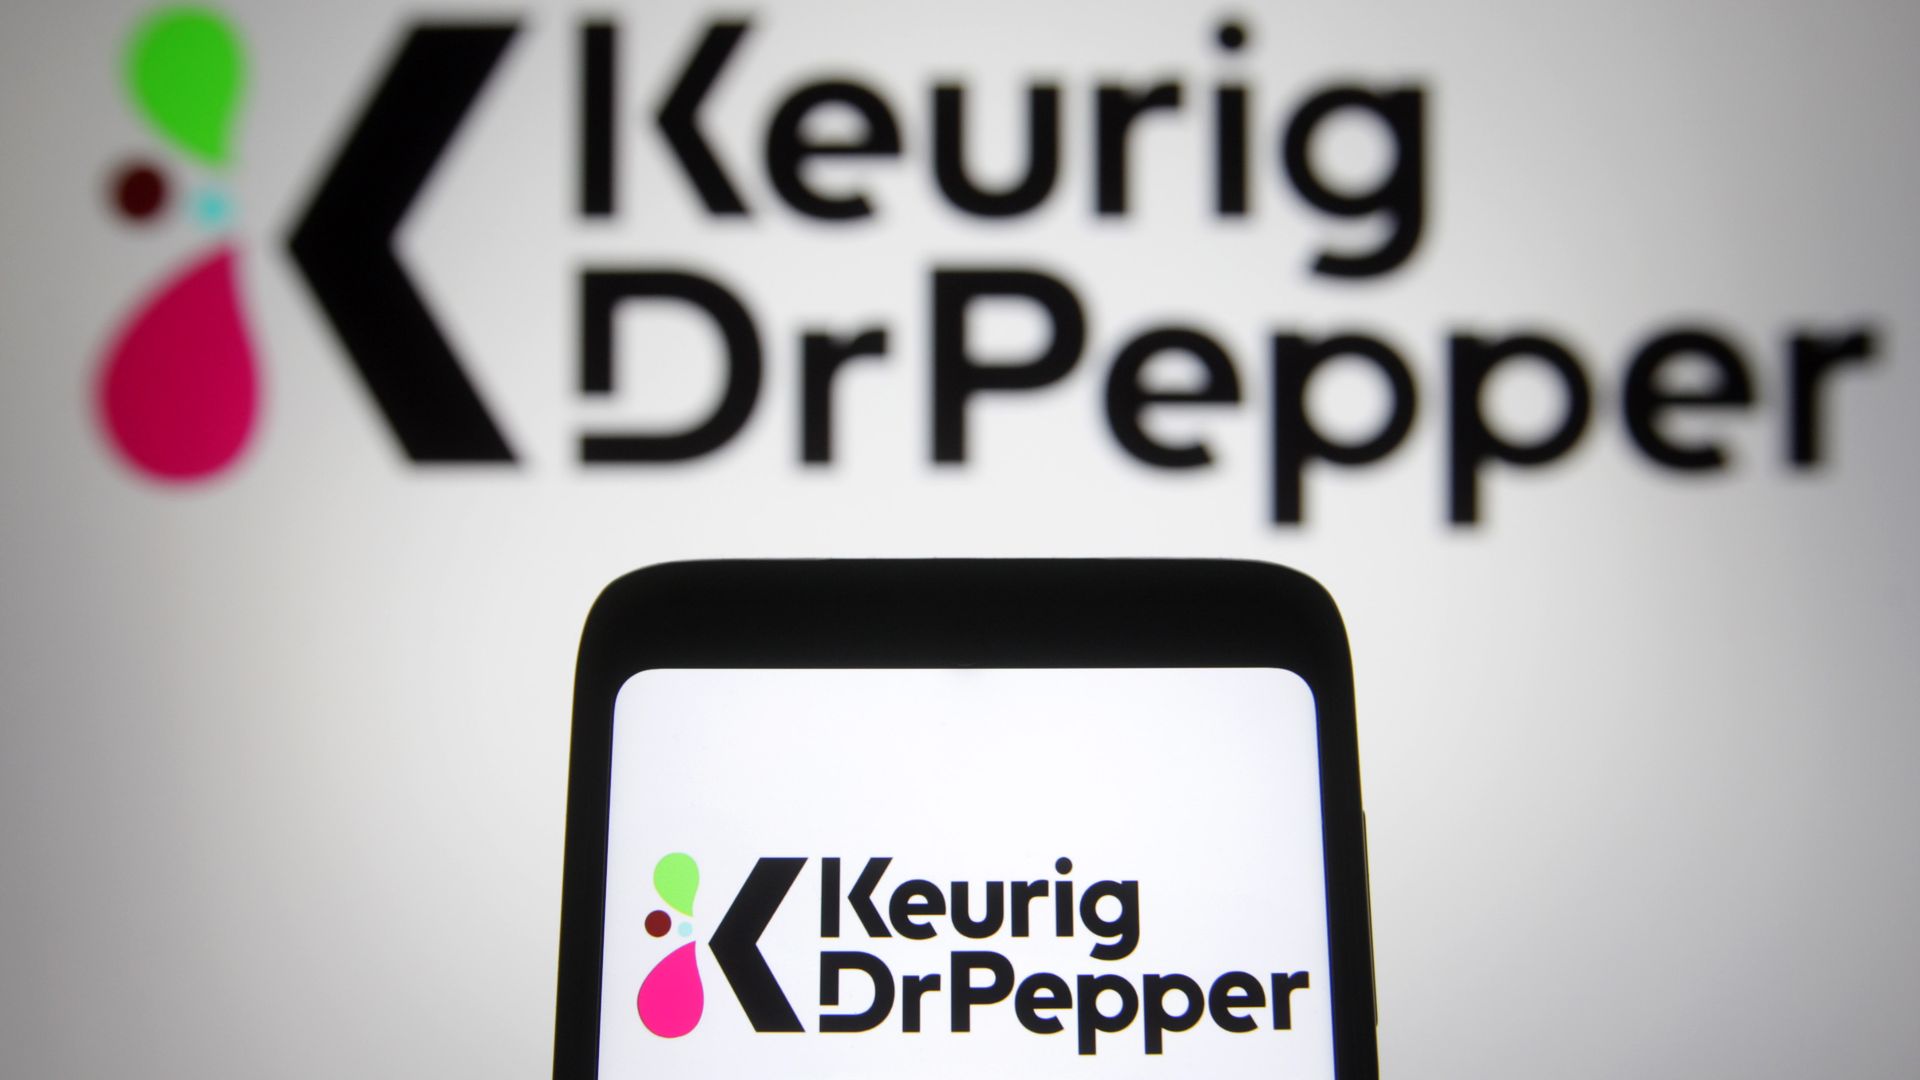 The Keurig Dr. Pepper logo and signage appears above a mobile device featuring the same logo.